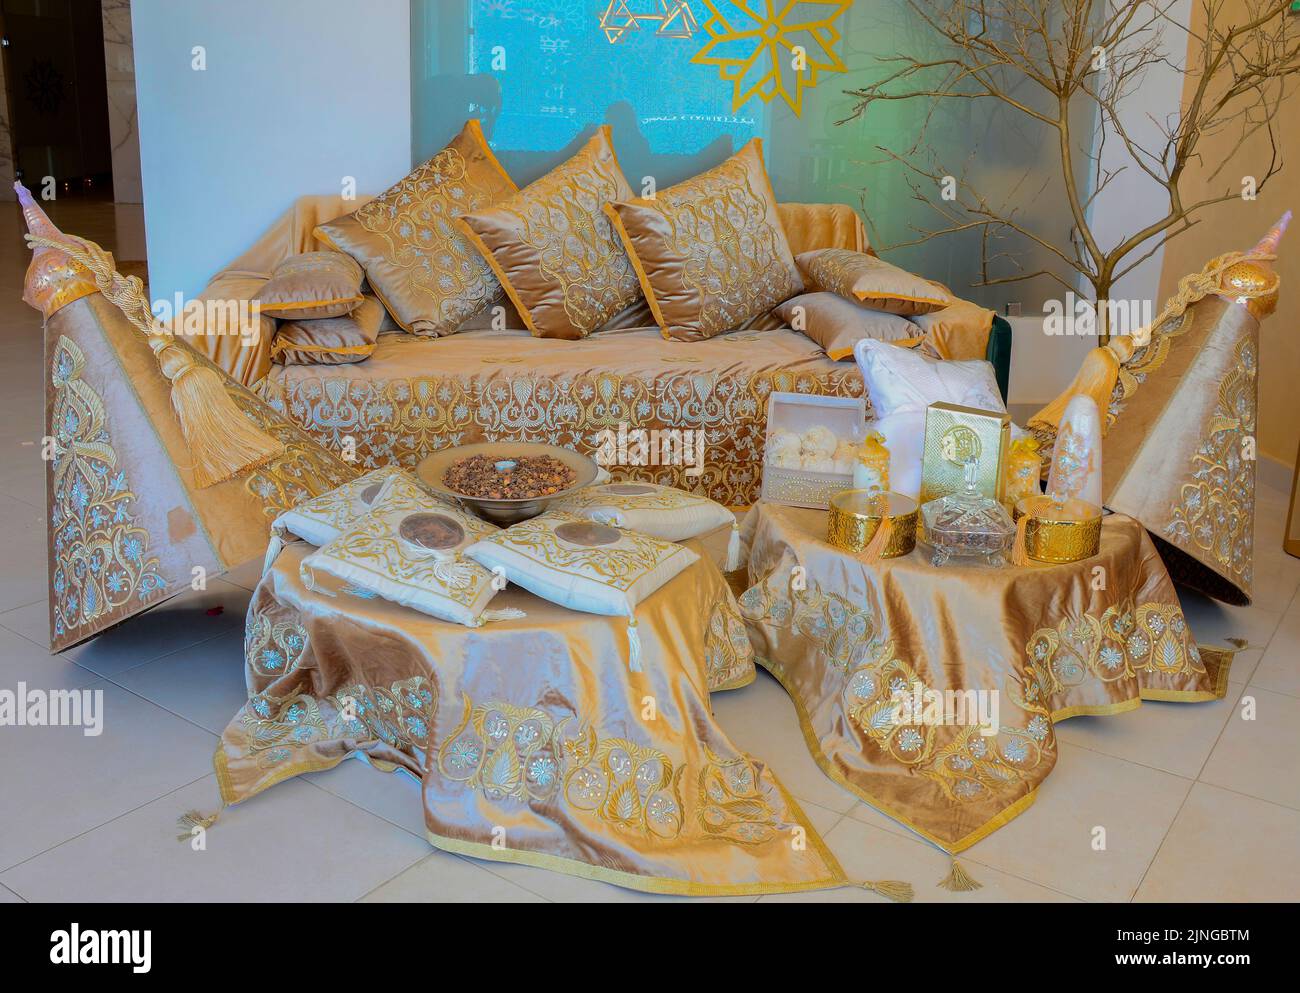 Moroccan wedding gifts with the Moroccan wedding sofa on which the groom and the bride sit Stock Photo